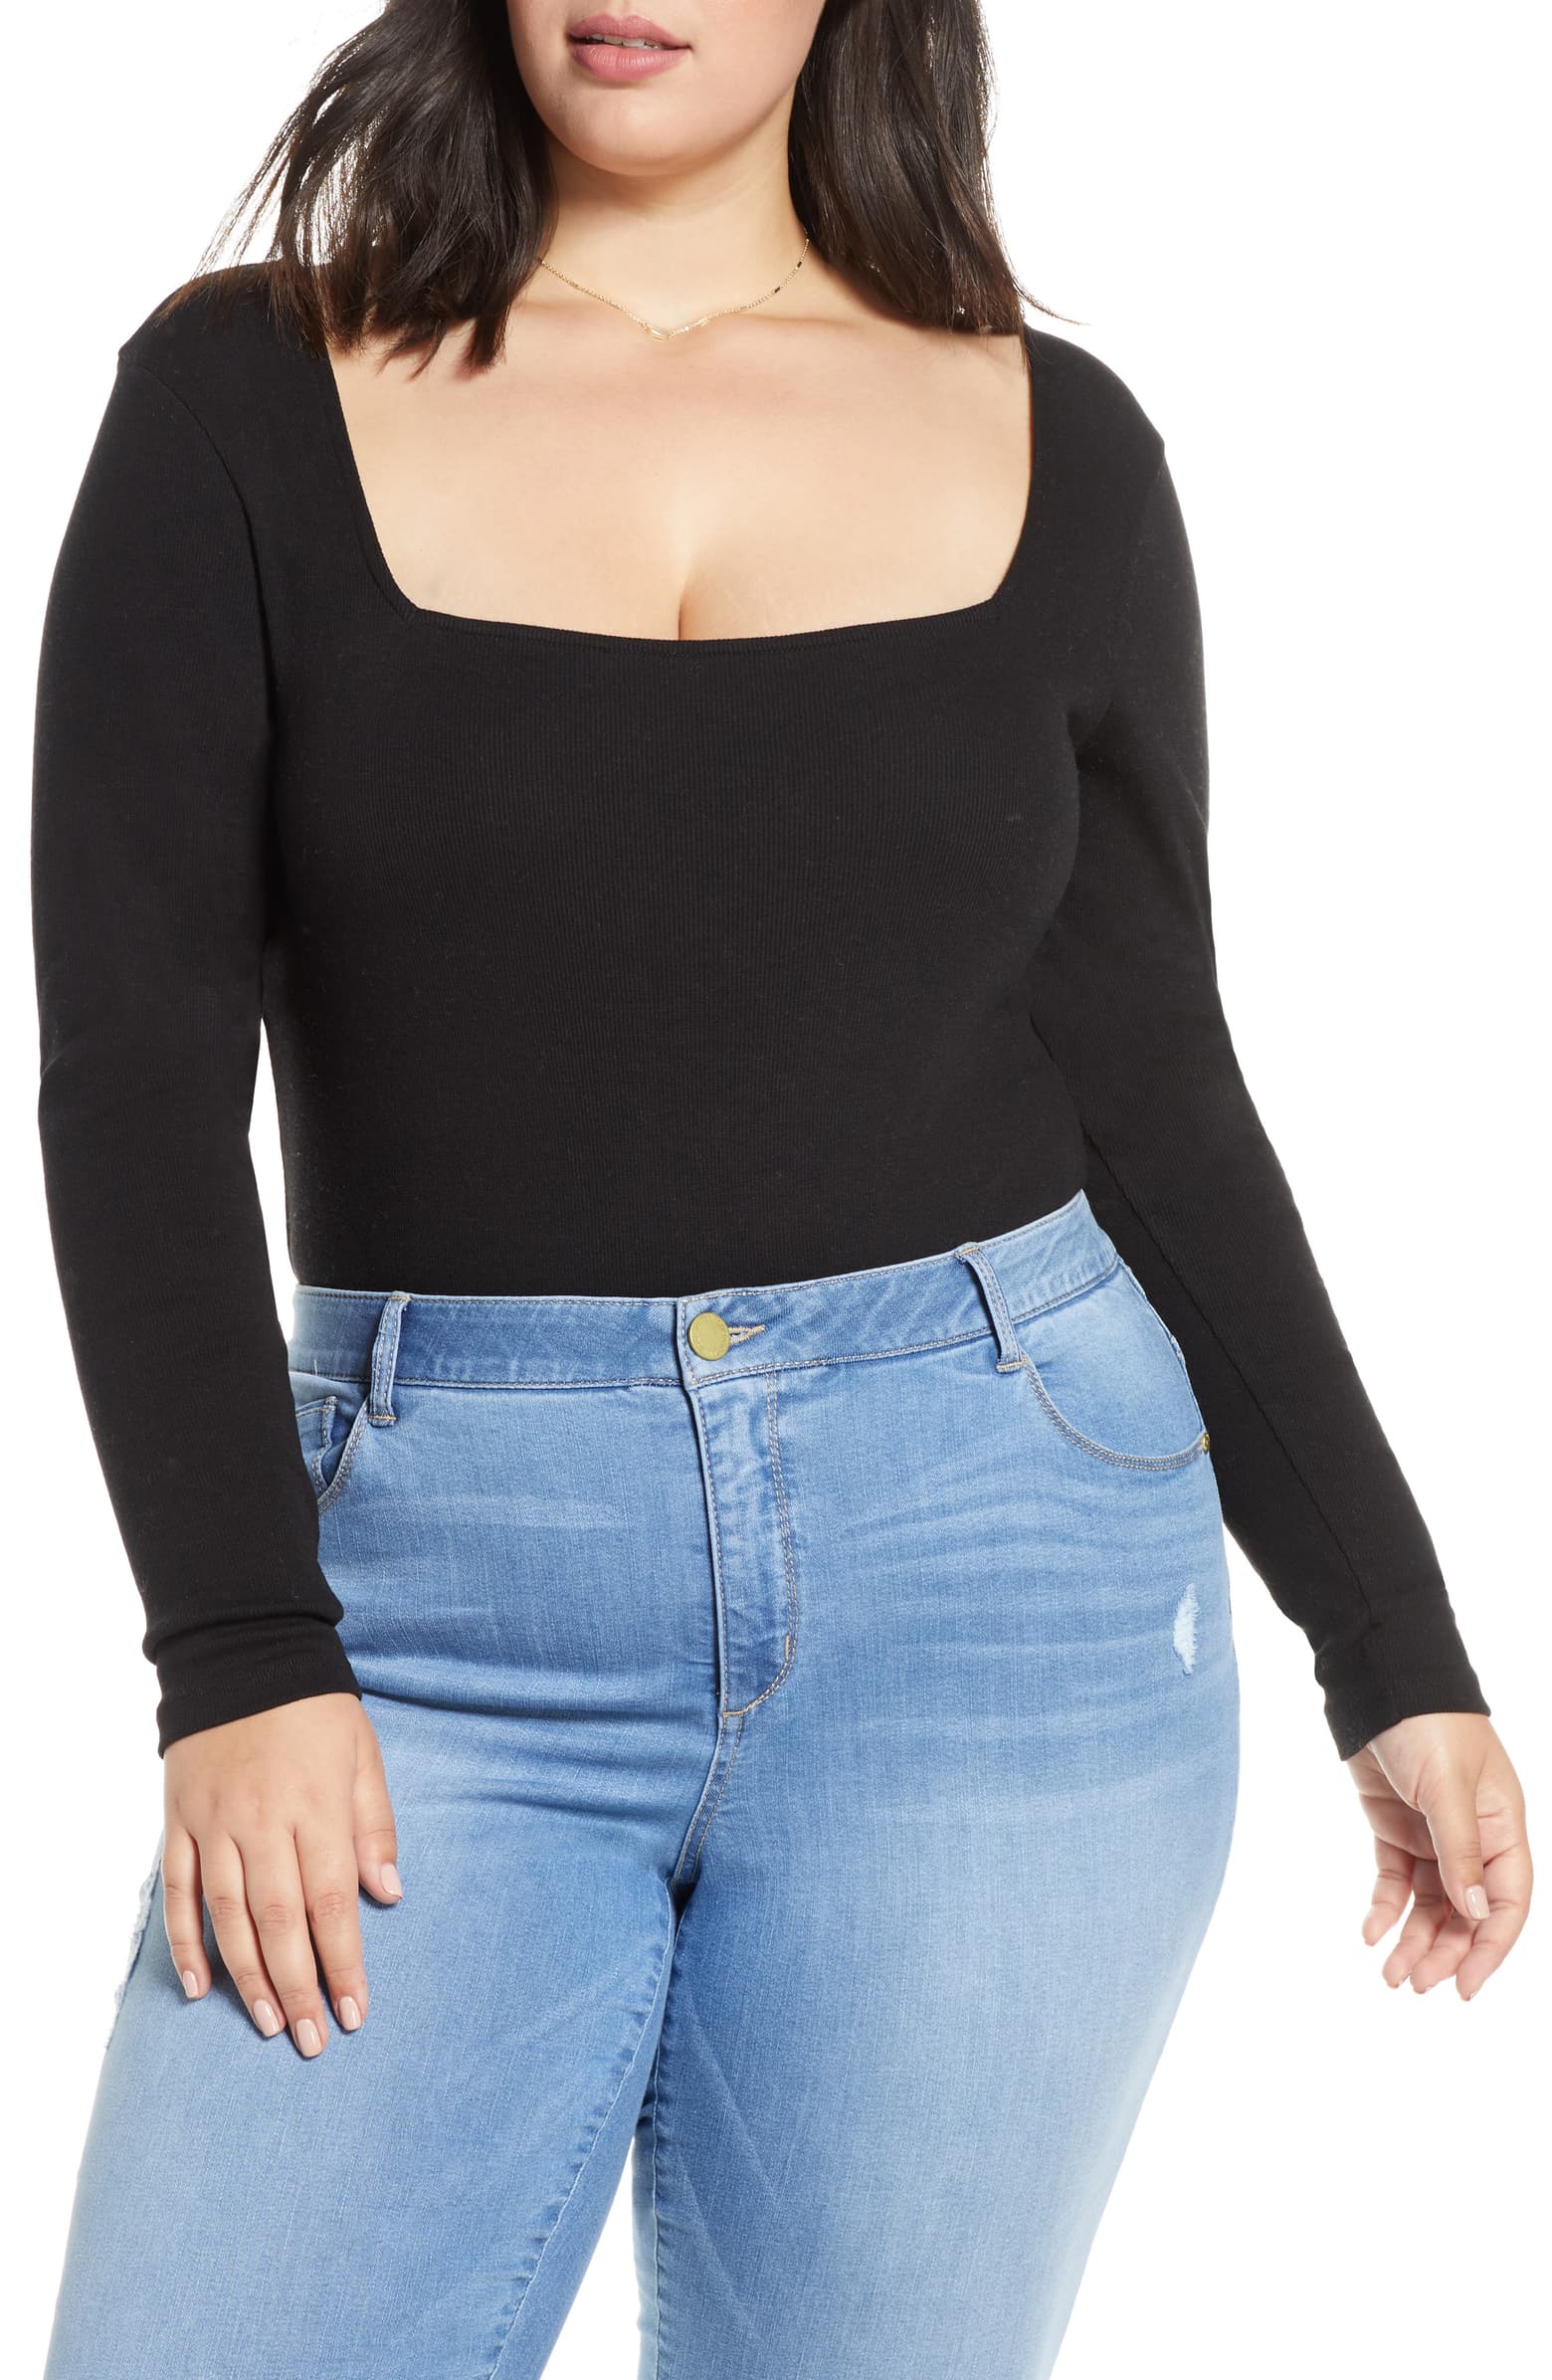 Oh Hey, Curvy Girl! Grab These Major Deals From Nordstrom’s Anniversary Sale